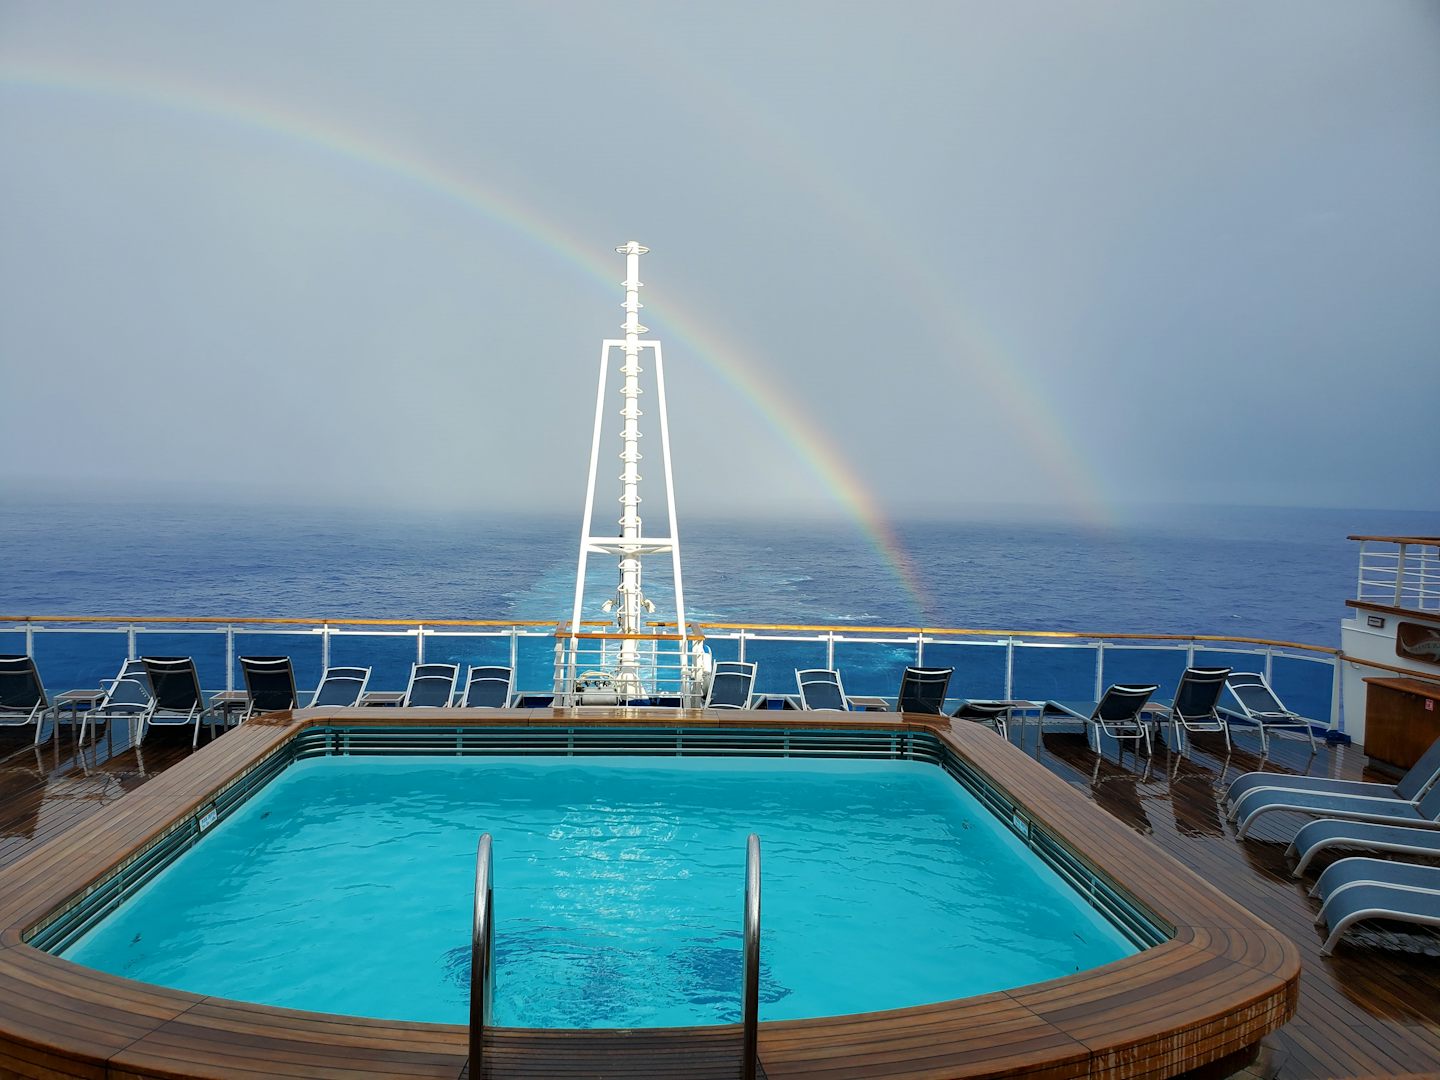 Double rainbow seen from the The Outrigger.